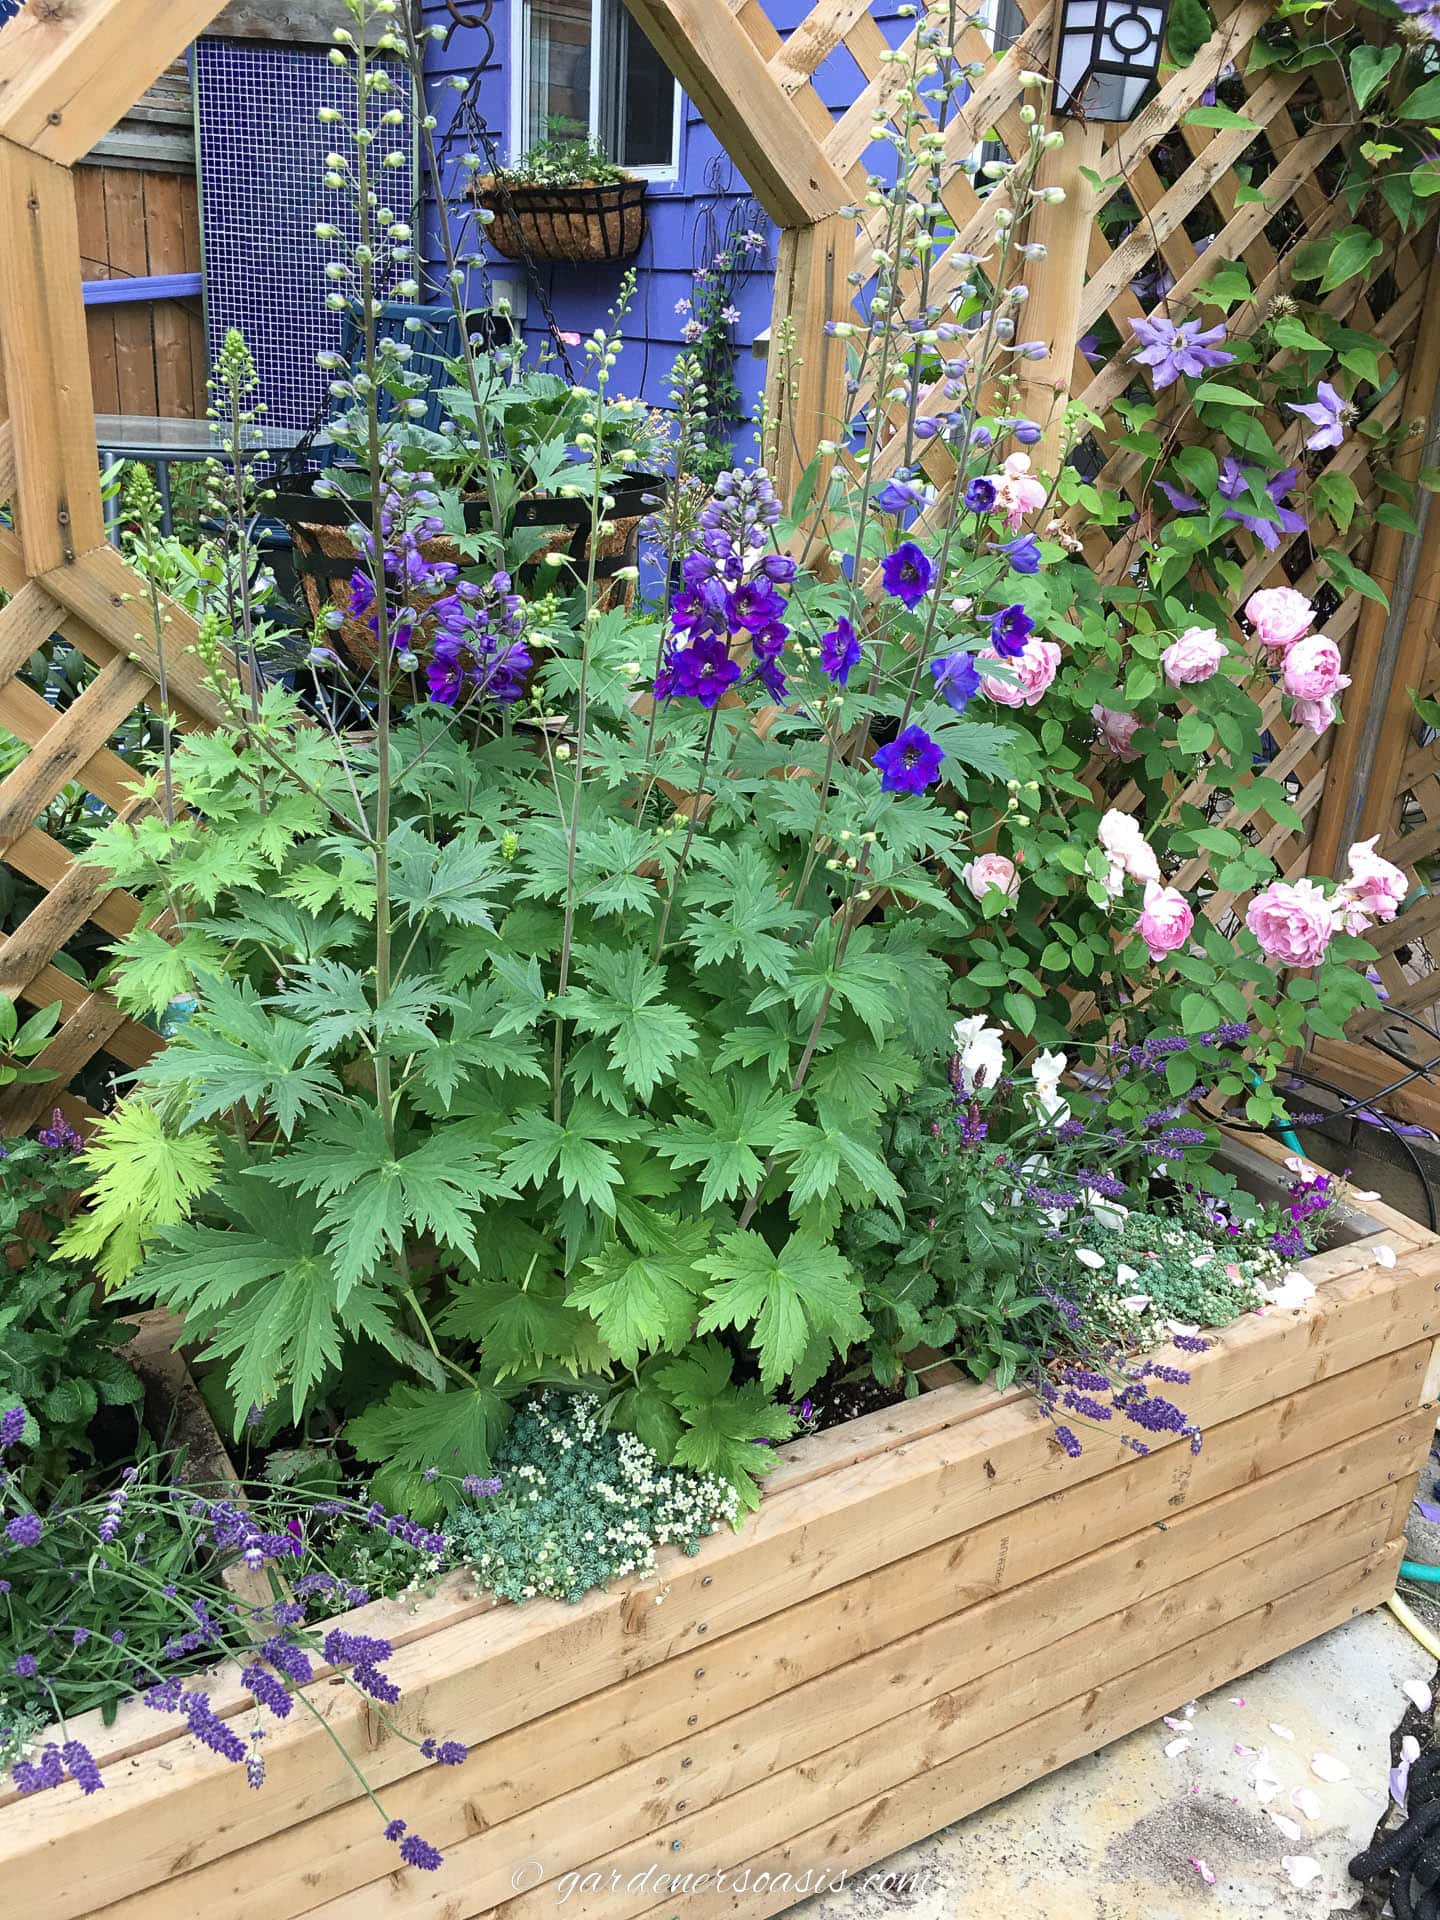 Delphiniums and roses growing in a large DIY planter box in front of a wooden fence